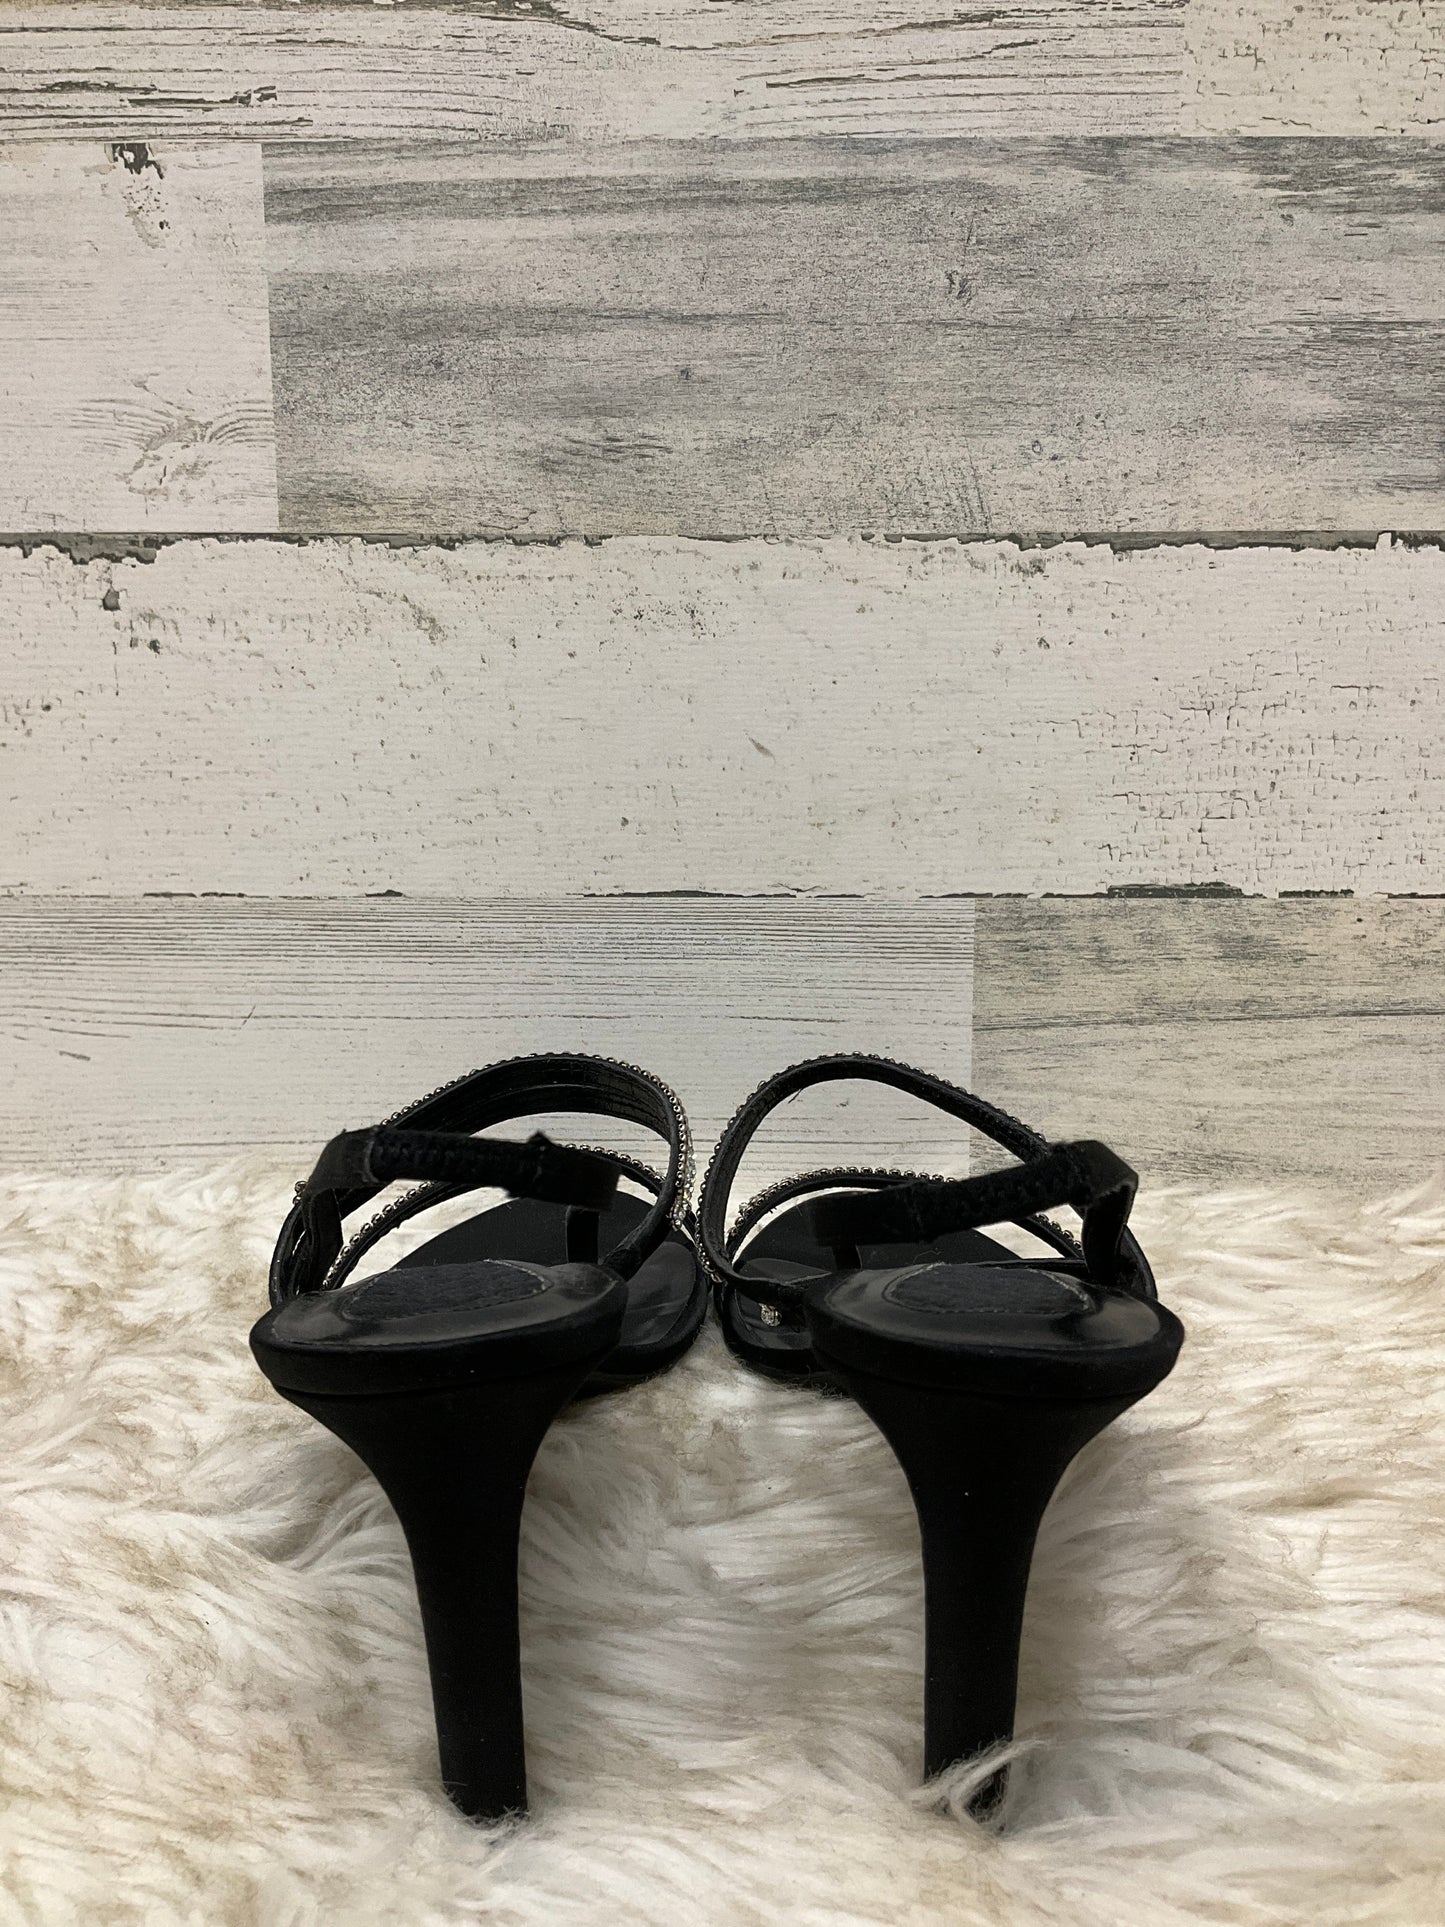 Sandals Heels Stiletto By Lord And Taylor  Size: 9.5